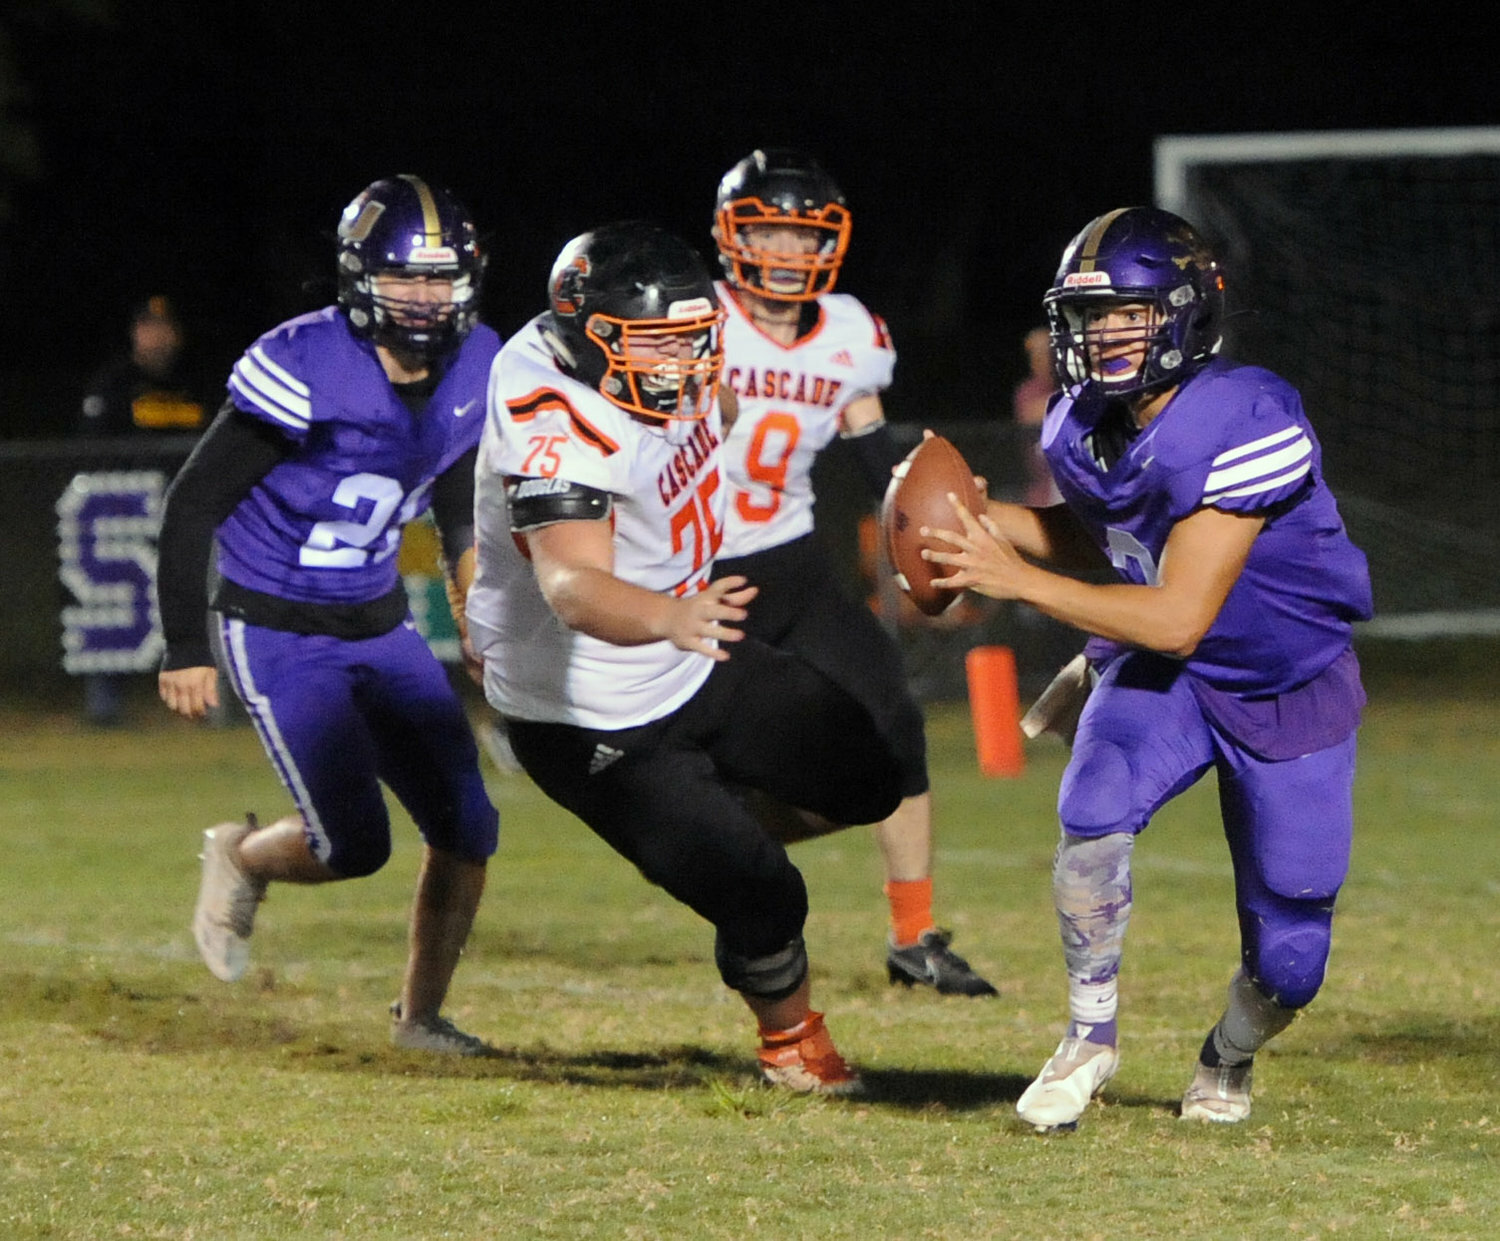 While at Community, Grooms was the field general under center for the past several seasons and hopes to continue playing quarterback at the college level.